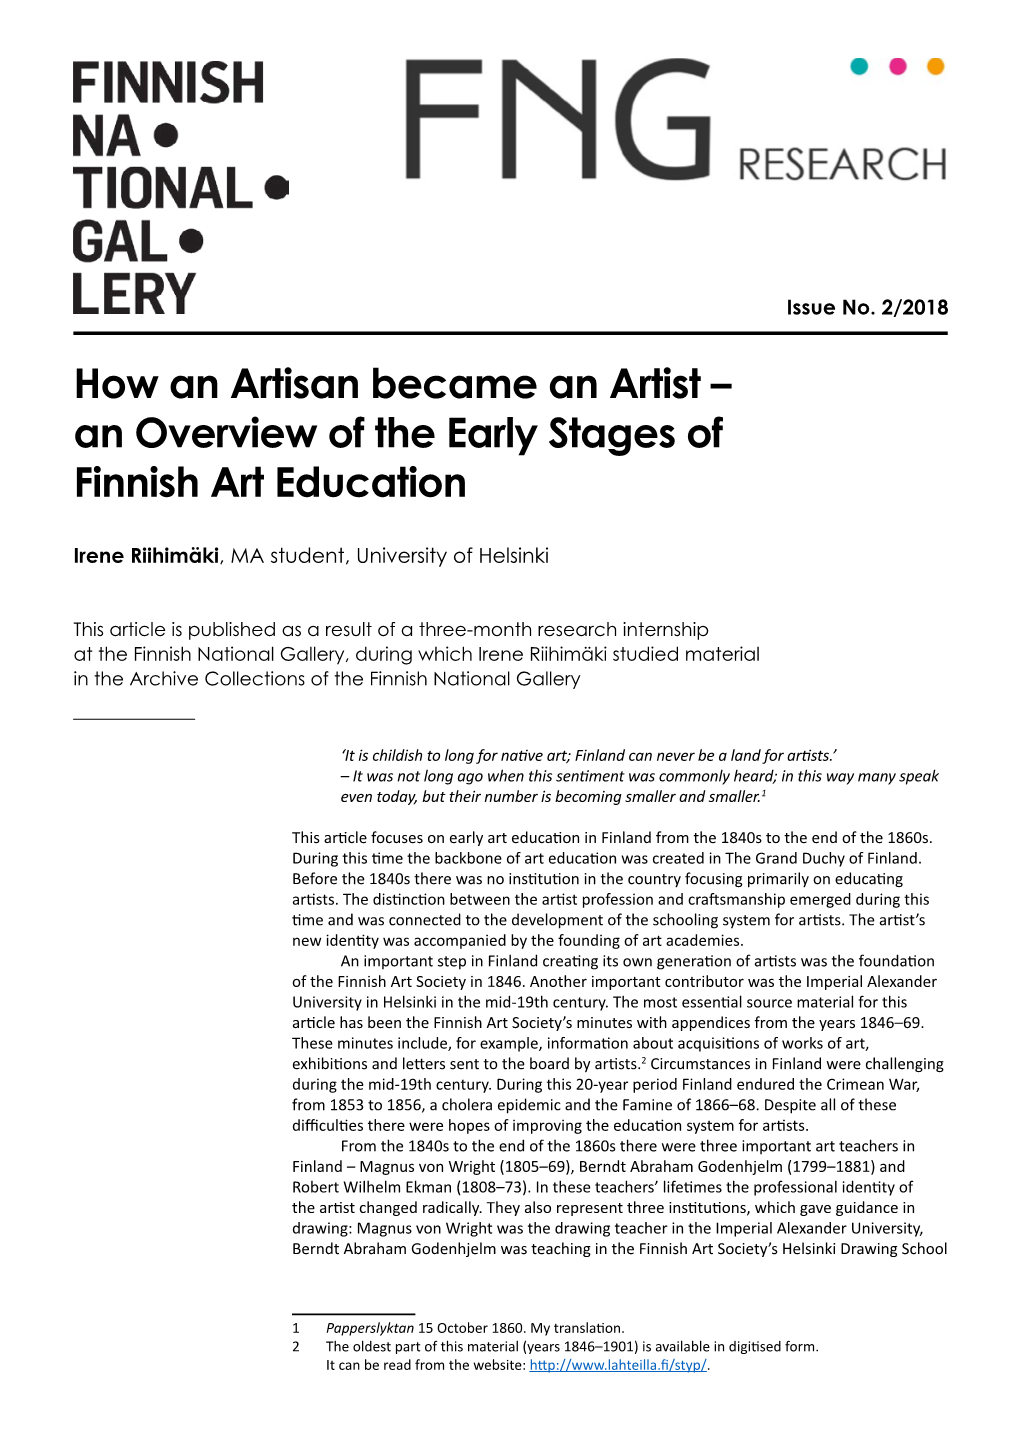 How an Artisan Became an Artist – an Overview of the Early Stages of Finnish Art Education